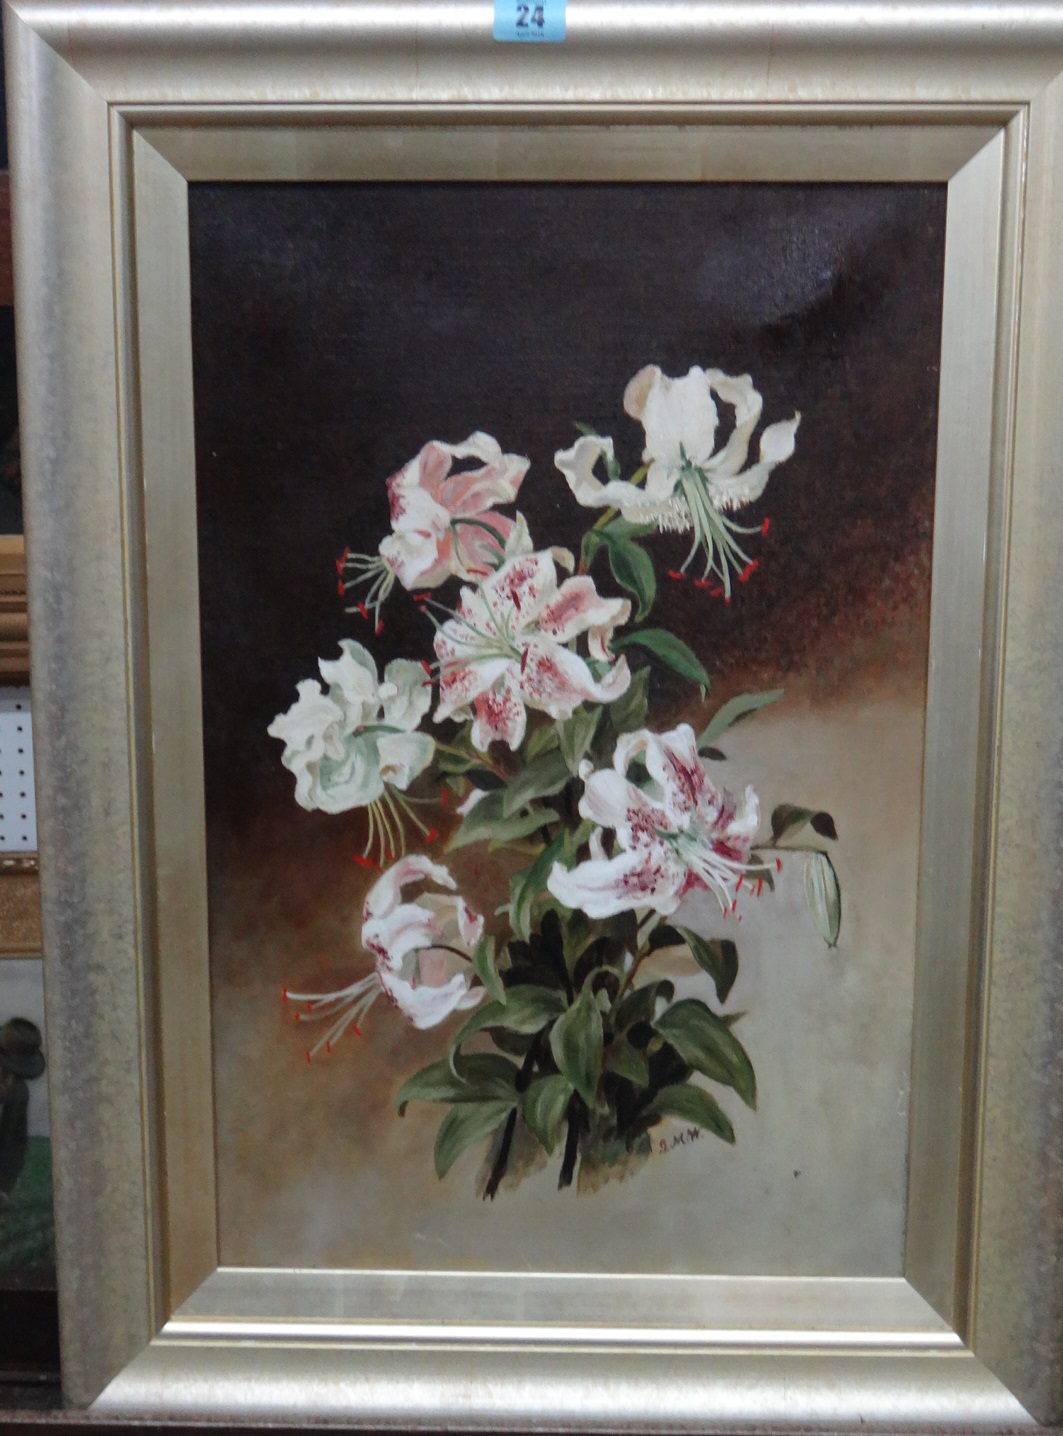 G** M** W** (early 20th century), Tiger lilies, oil on canvas, signed with initials, 52cm x 34cm. L1